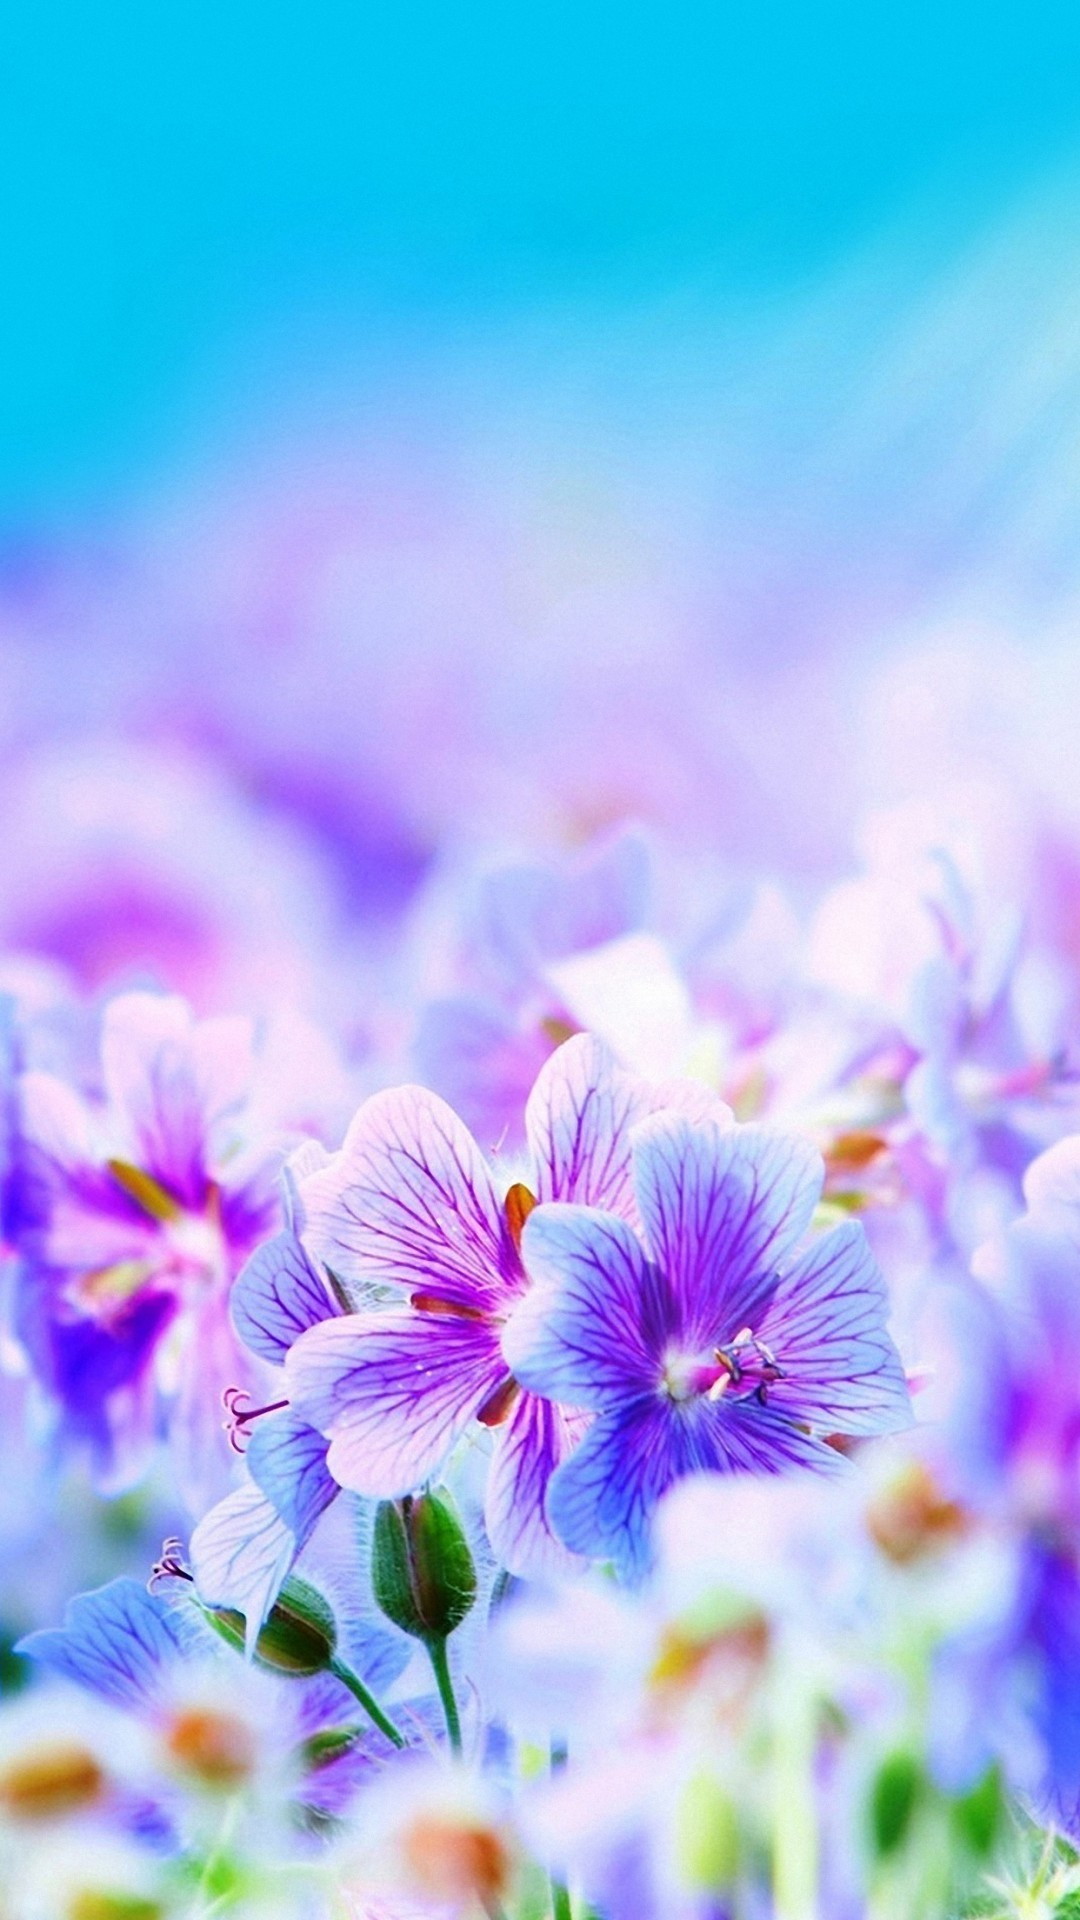 Flowers Purple iPhone Wallpaper Design with high-resolution 1080x1920 pixel. You can set as wallpaper for Apple iPhone X, XS Max, XR, 8, 7, 6, SE, iPad. Enjoy and share your favorite HD wallpapers and background images